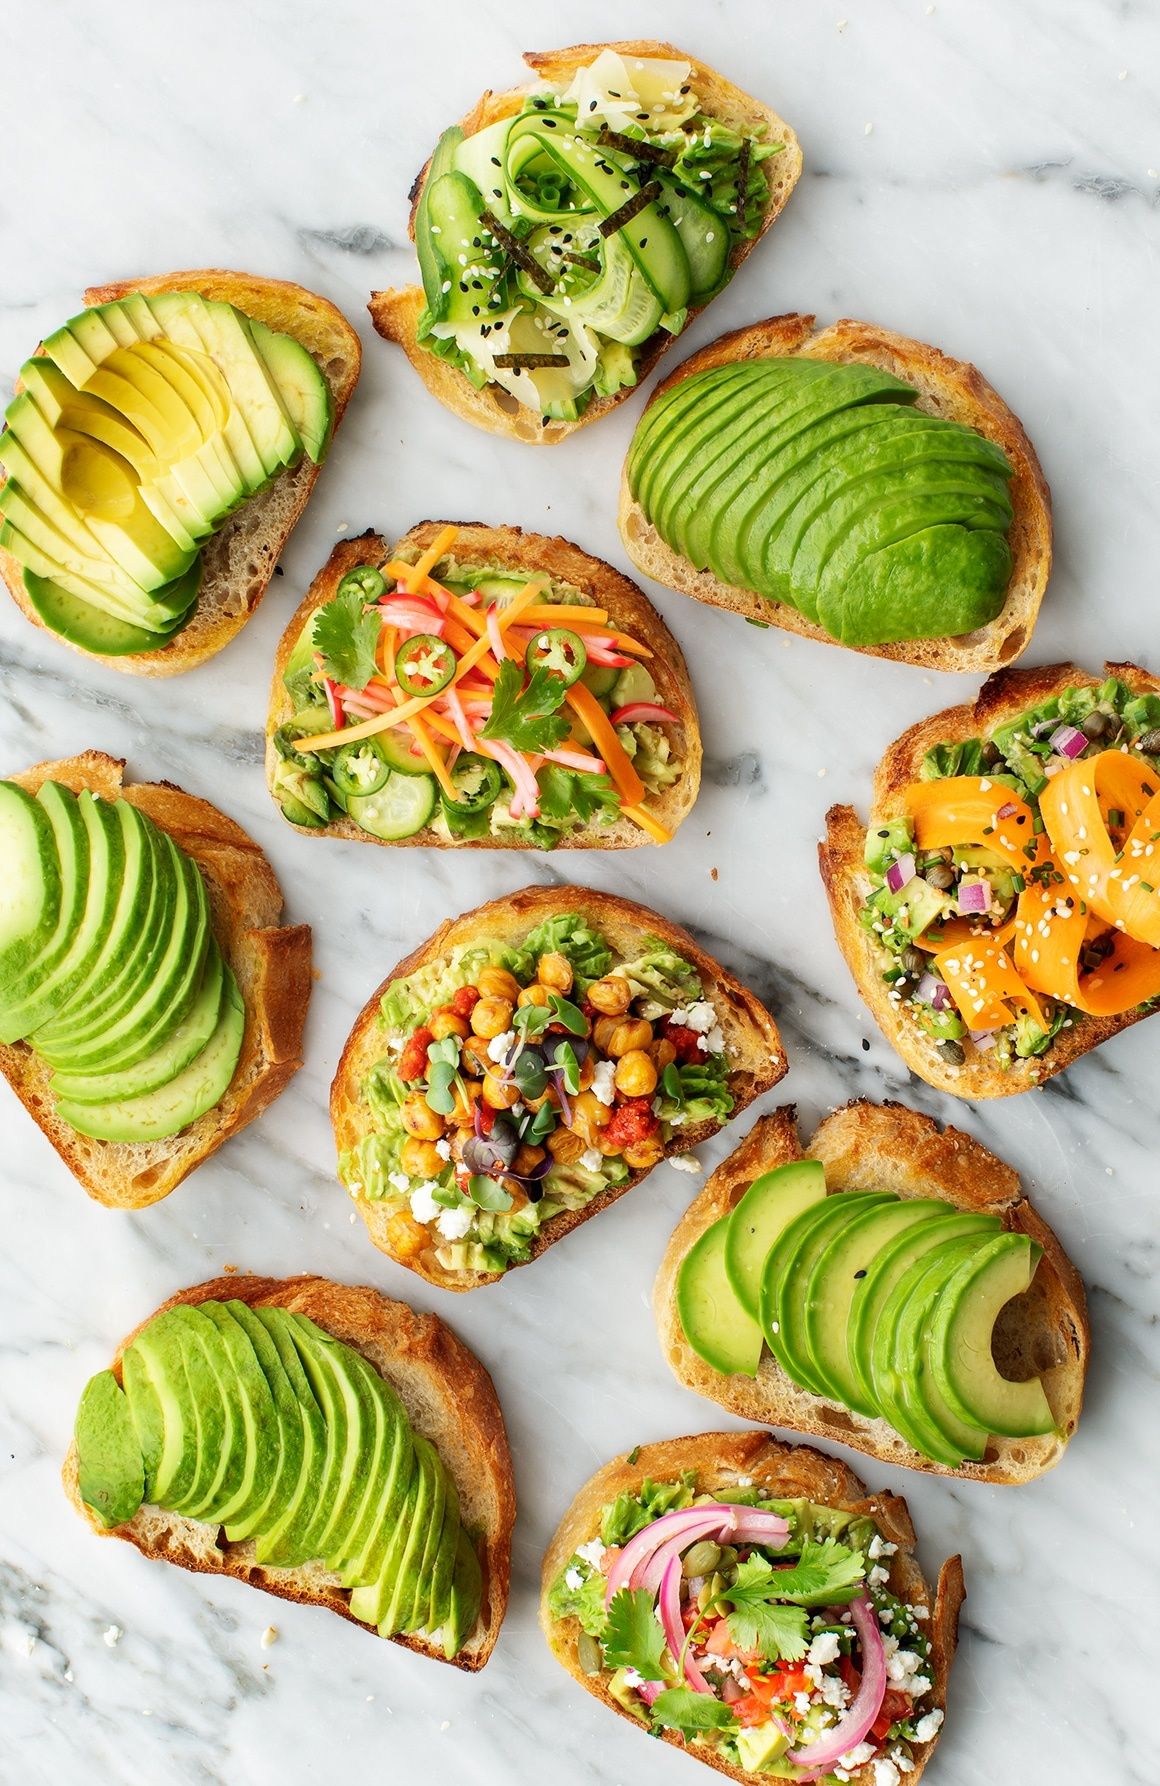 10 Plant-Based Breakfasts to Power Your Day